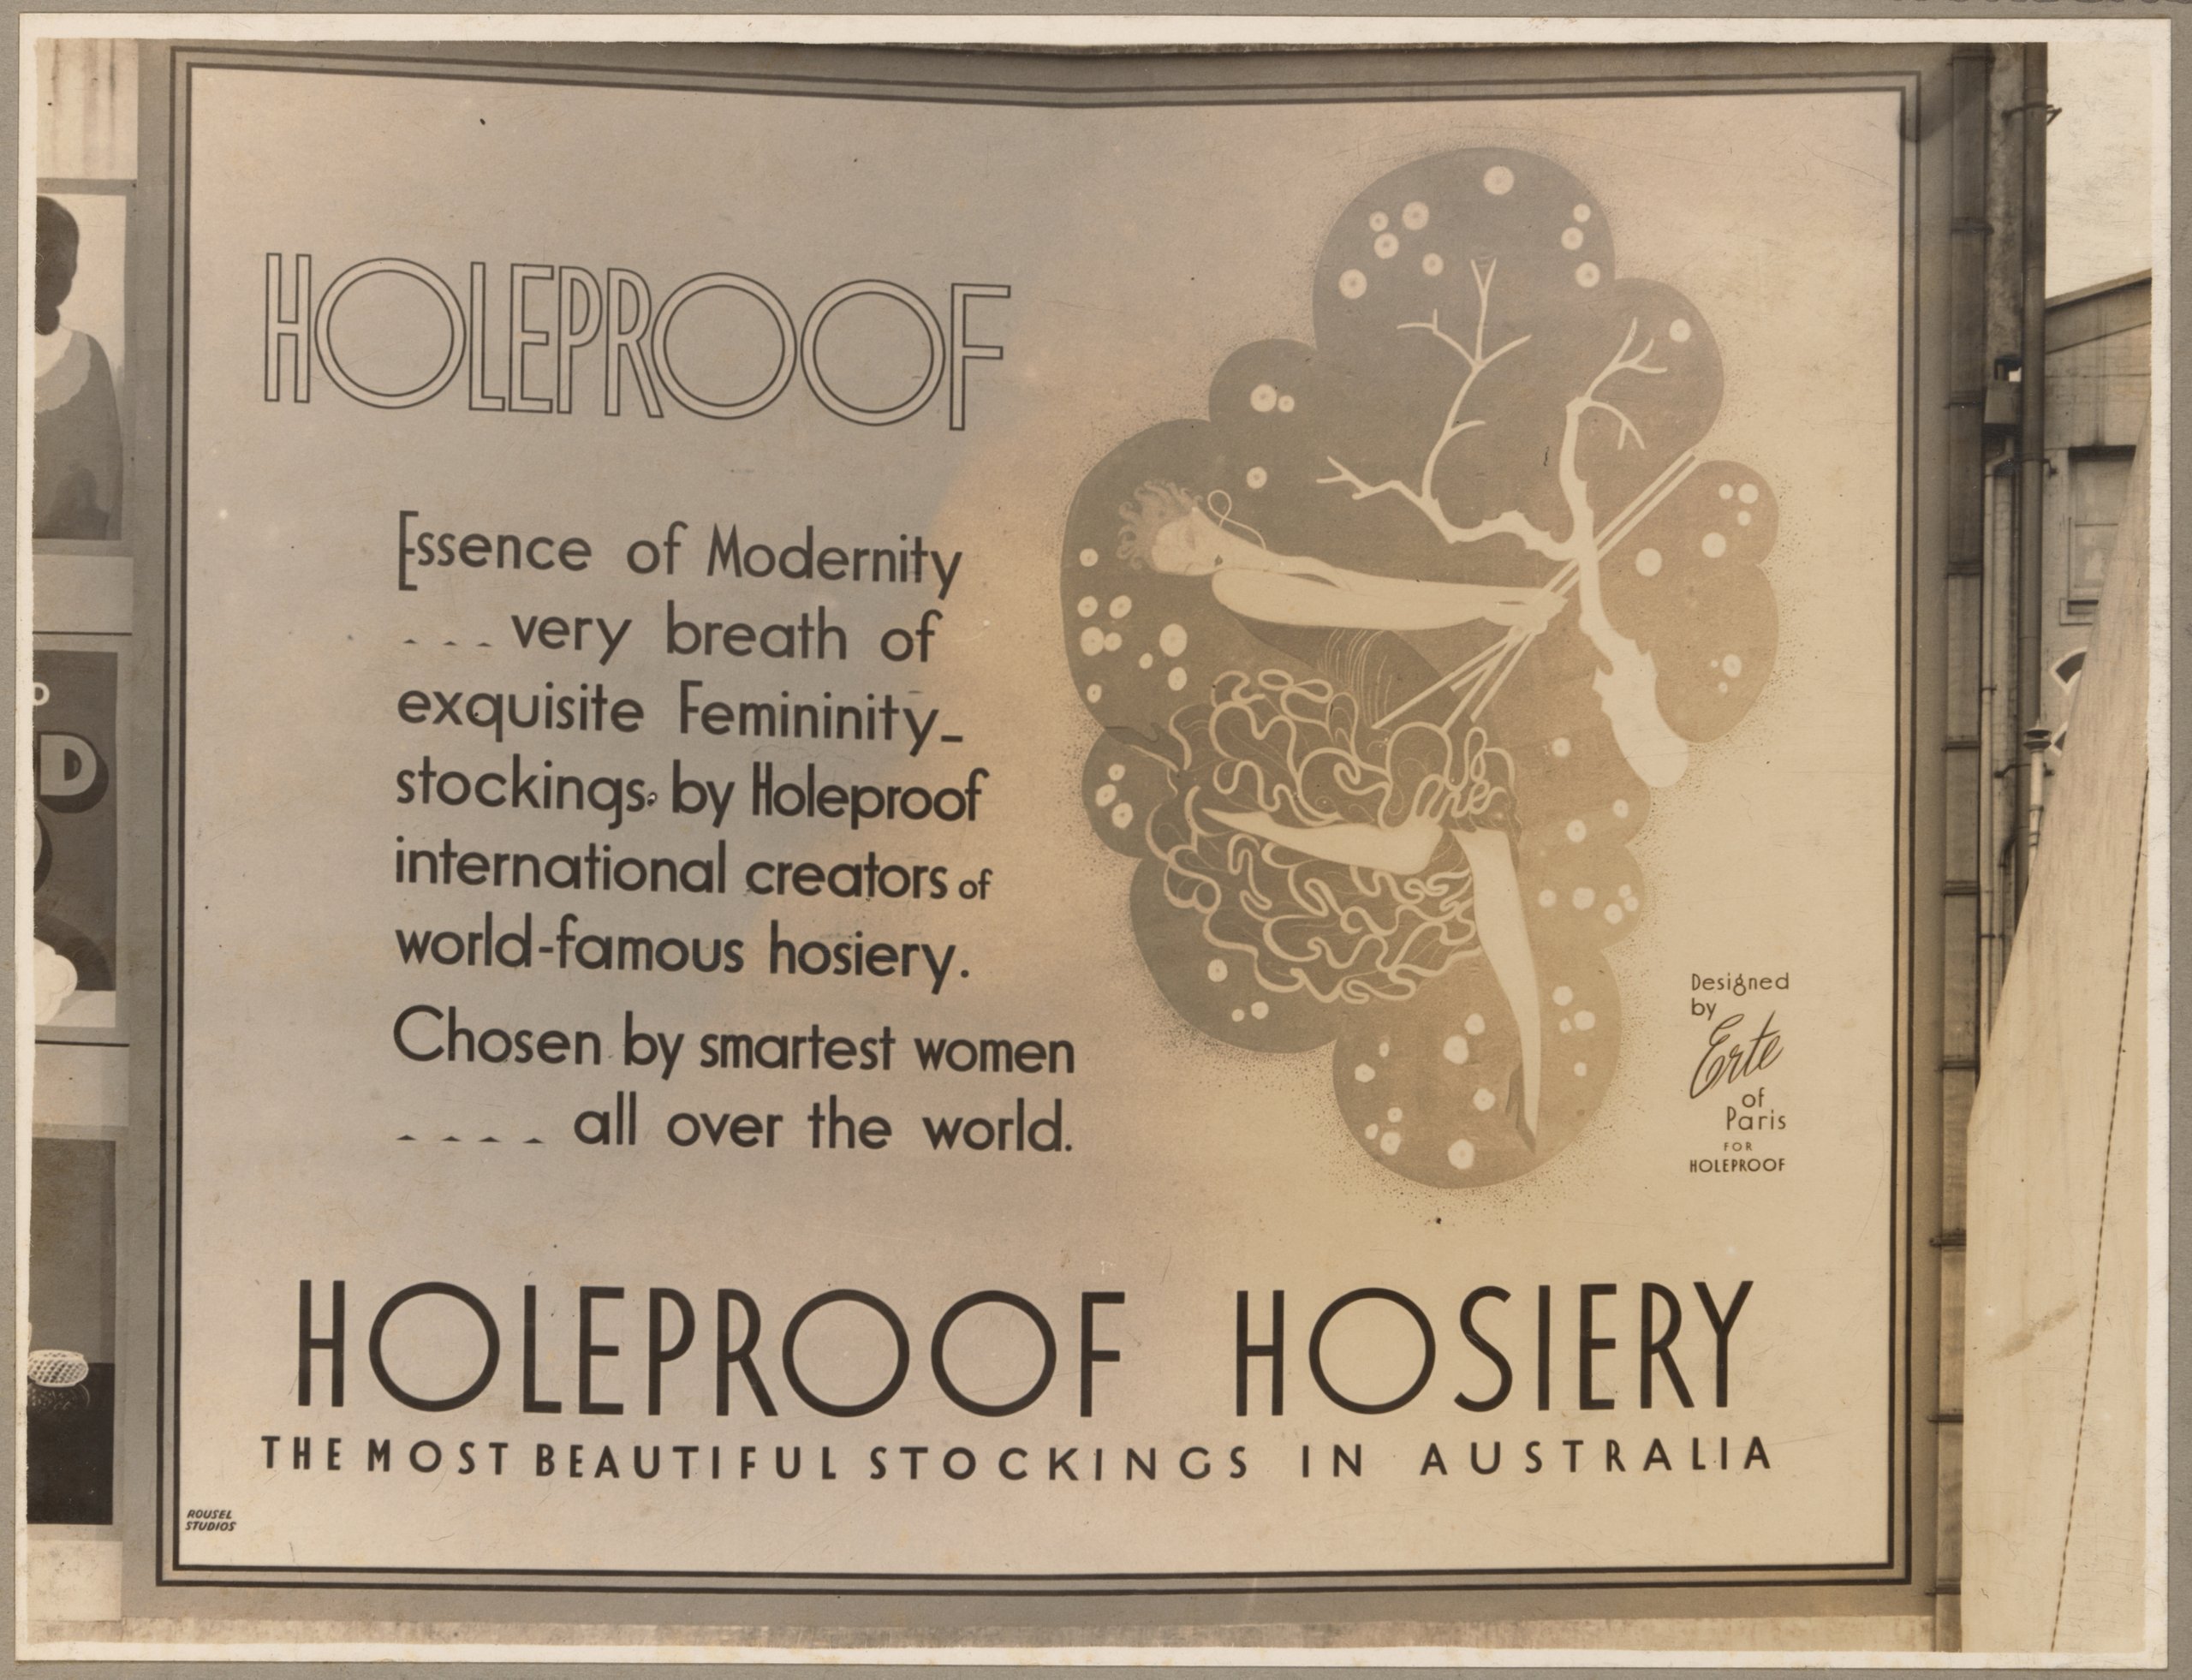 Photograph of advertising billboard for Holeproof Hosiery